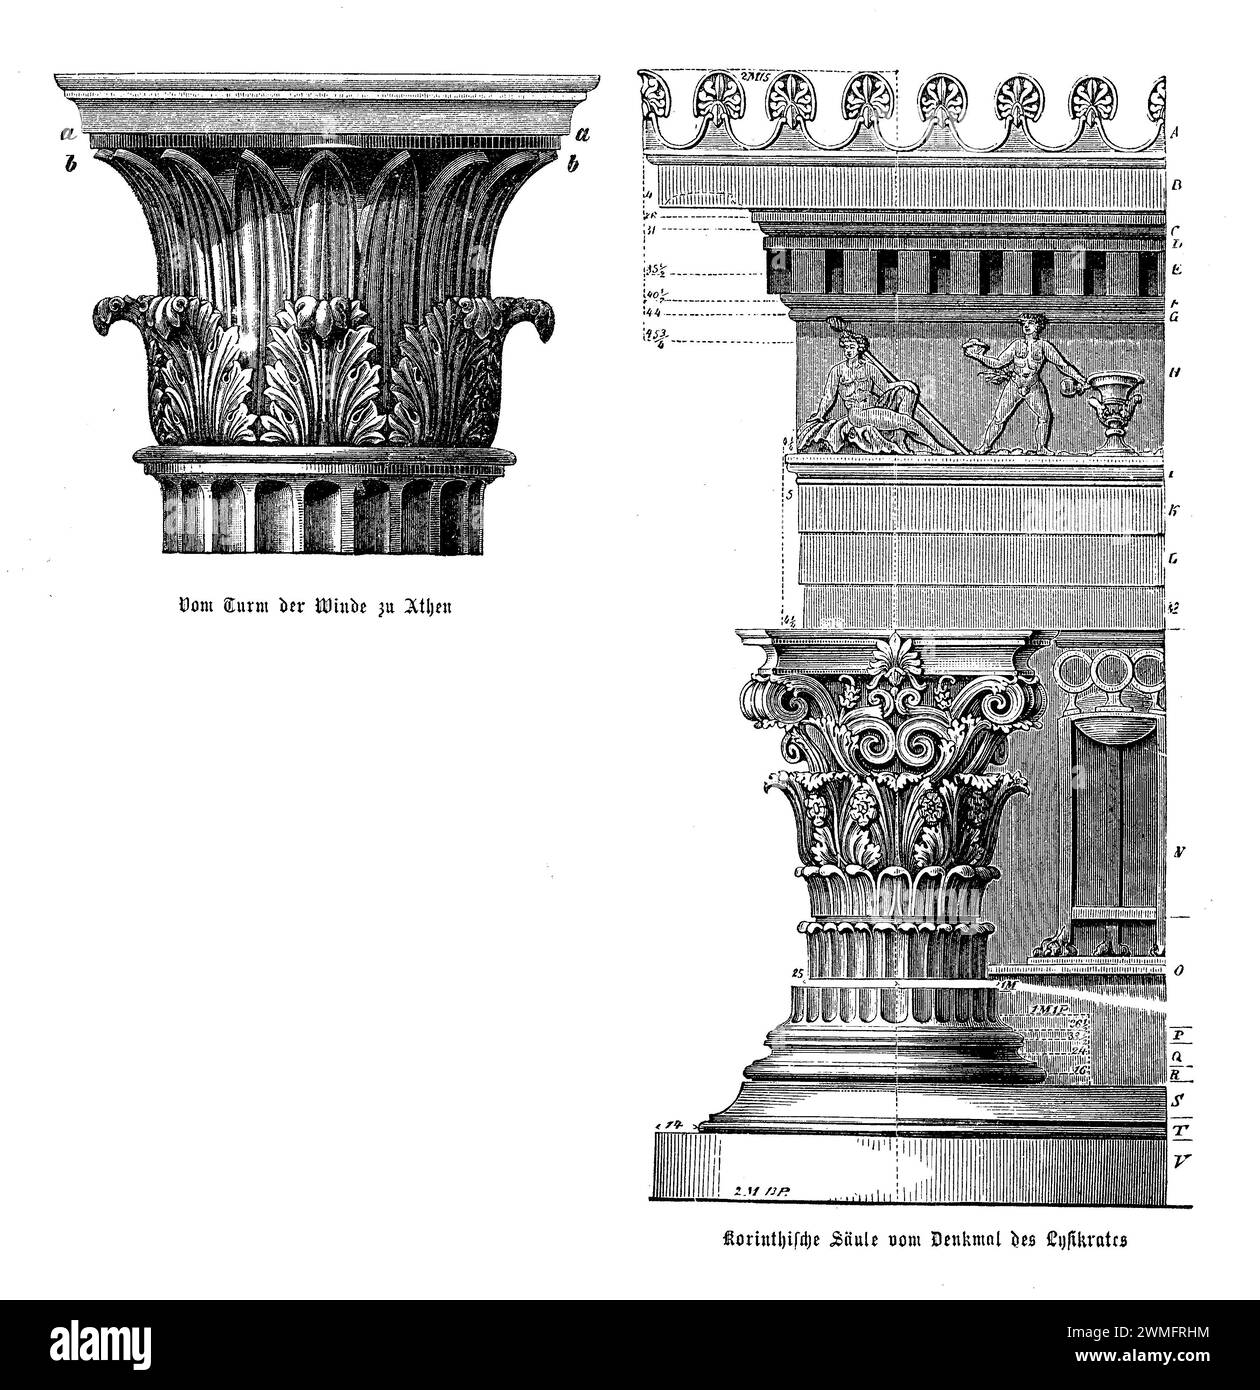 Originating in ancient Greece, the Corinthian order is distinguished by its slender fluted columns and elaborate capitals adorned with acanthus leaves. This order represents the zenith of Greek architectural refinement and was later adopted and adapted by the Romans, who added their own flair to its decorative potential. Its use in temples, public buildings, and monuments across the Mediterranean basin underscores a legacy of beauty and grandeur, making it a timeless symbol of architectural achievement Stock Photo